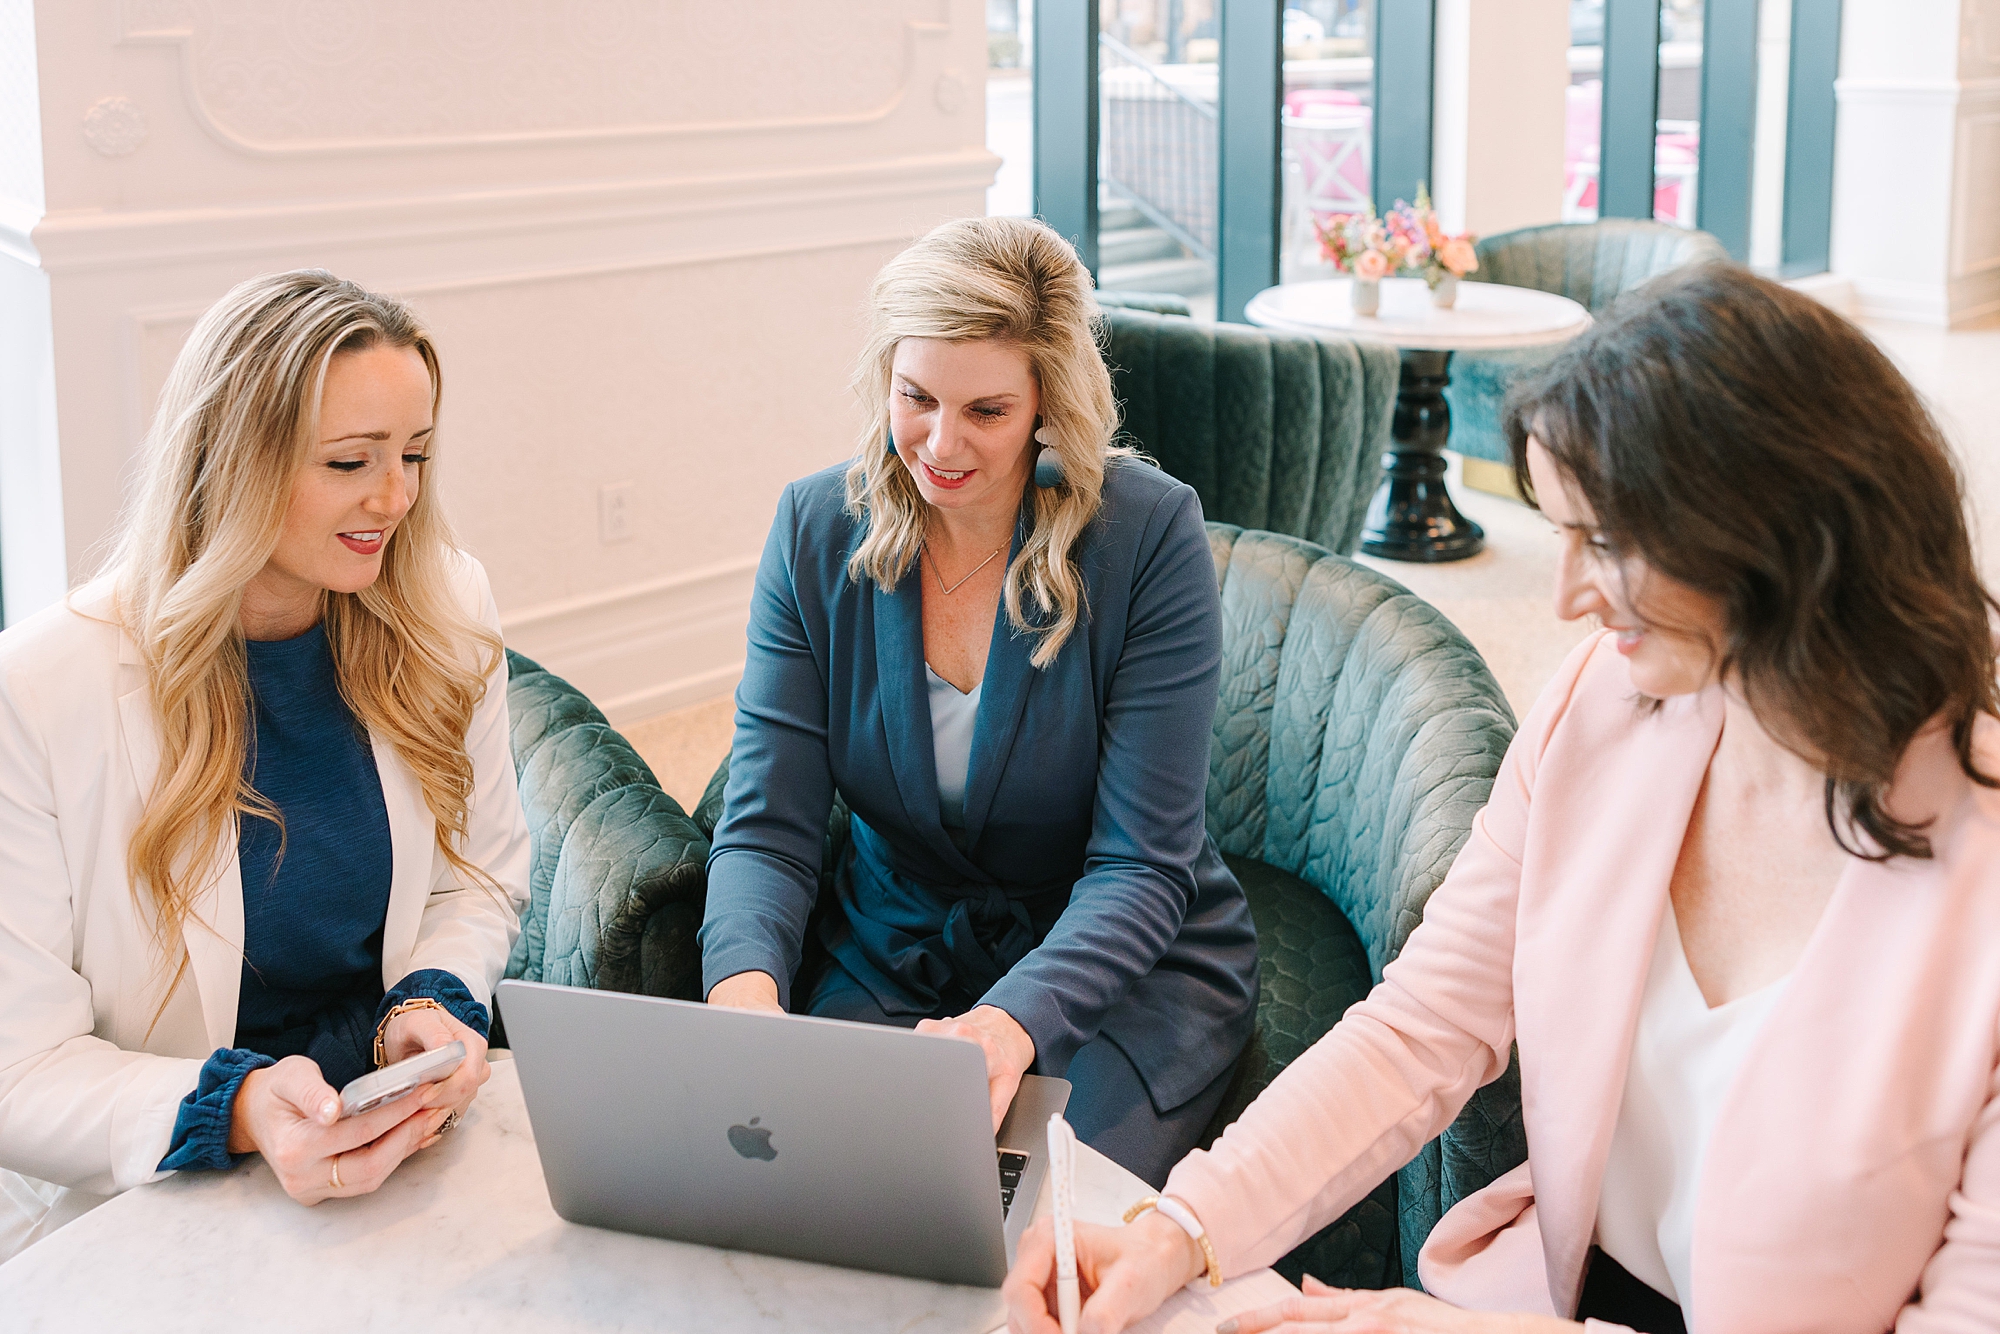 woman in blue sweater types on computer while two women talk to her